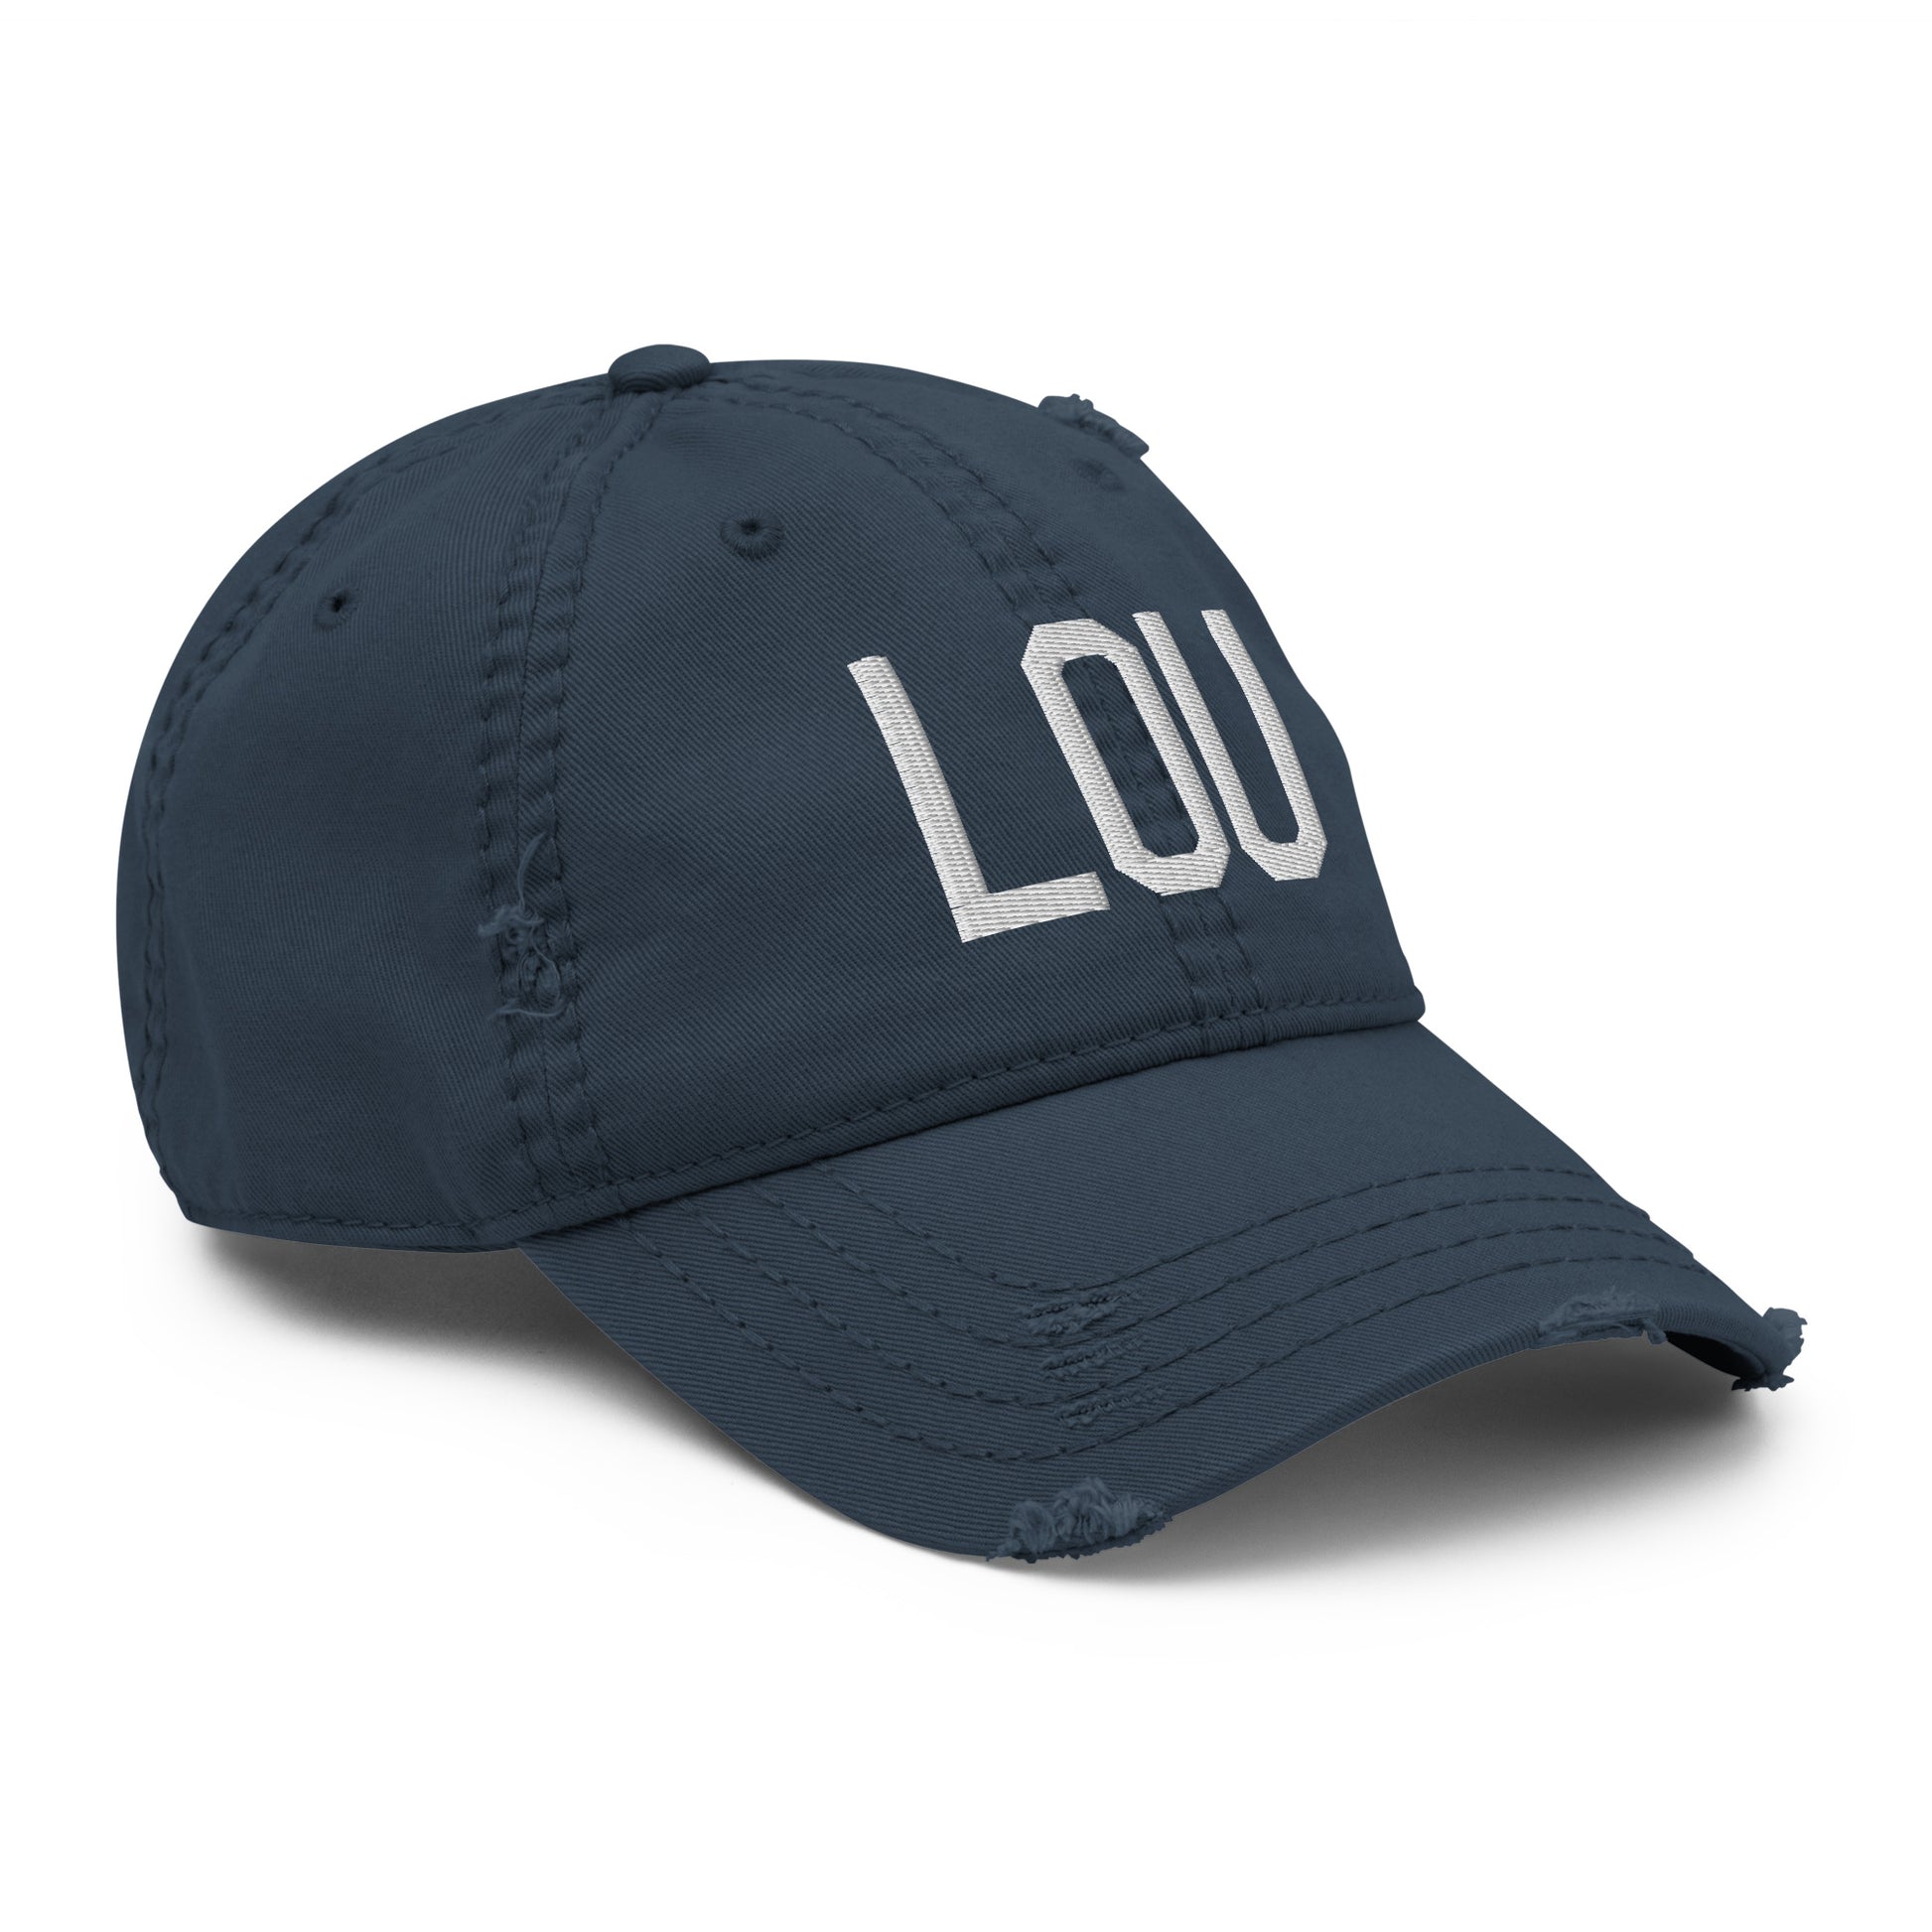 Airport Code Distressed Hat - White • LOU Louisville • YHM Designs - Image 14